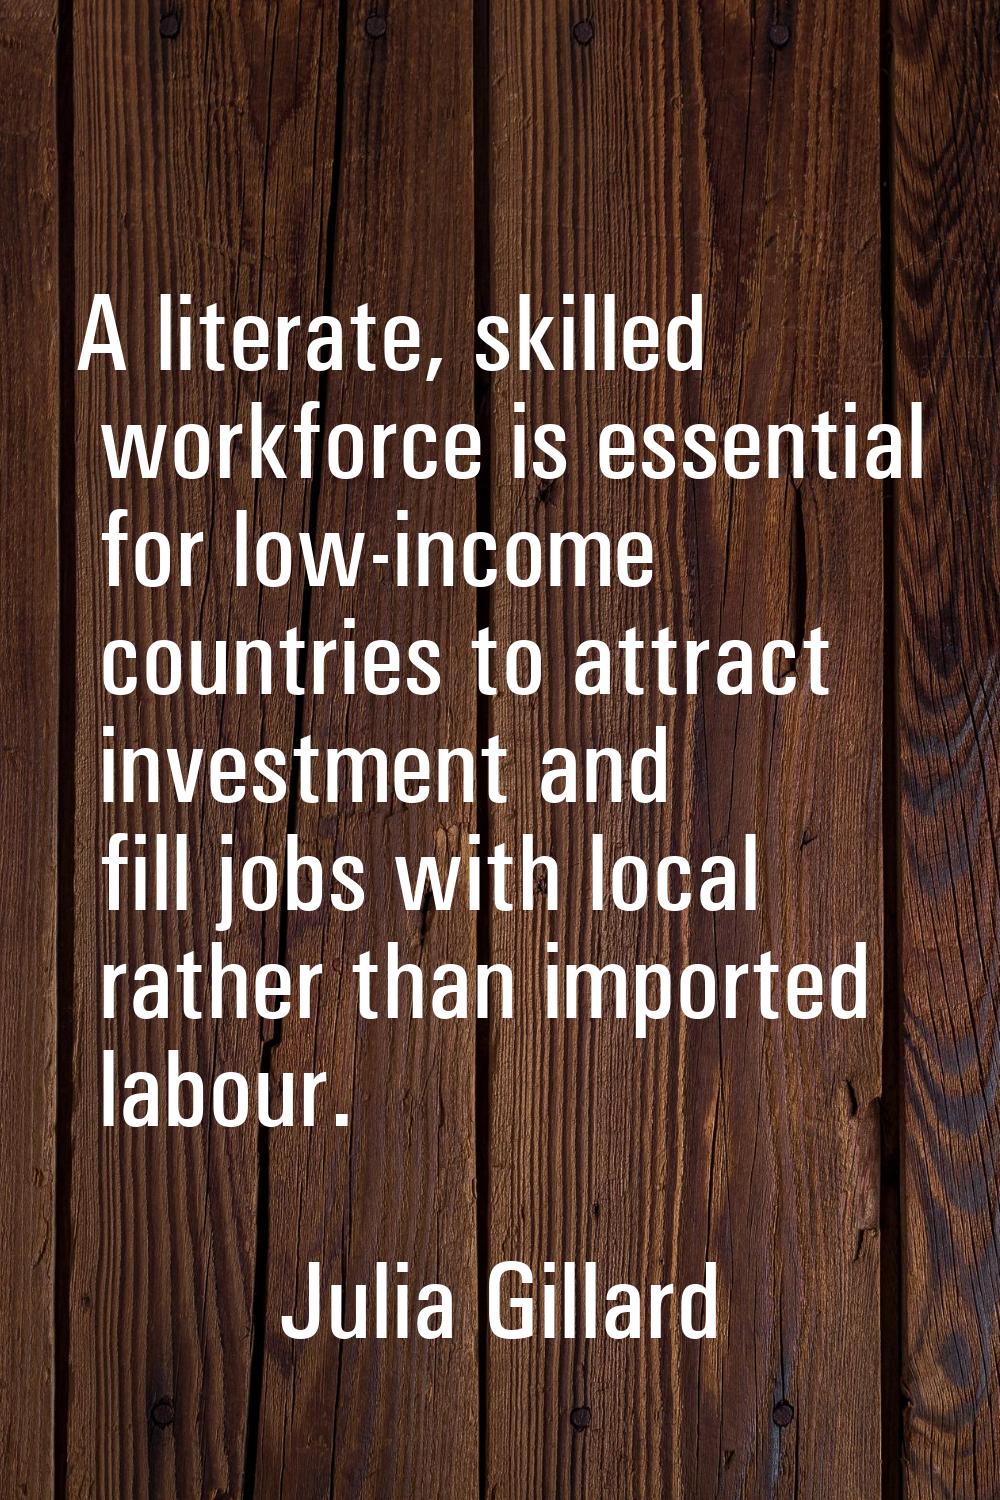 A literate, skilled workforce is essential for low-income countries to attract investment and fill 